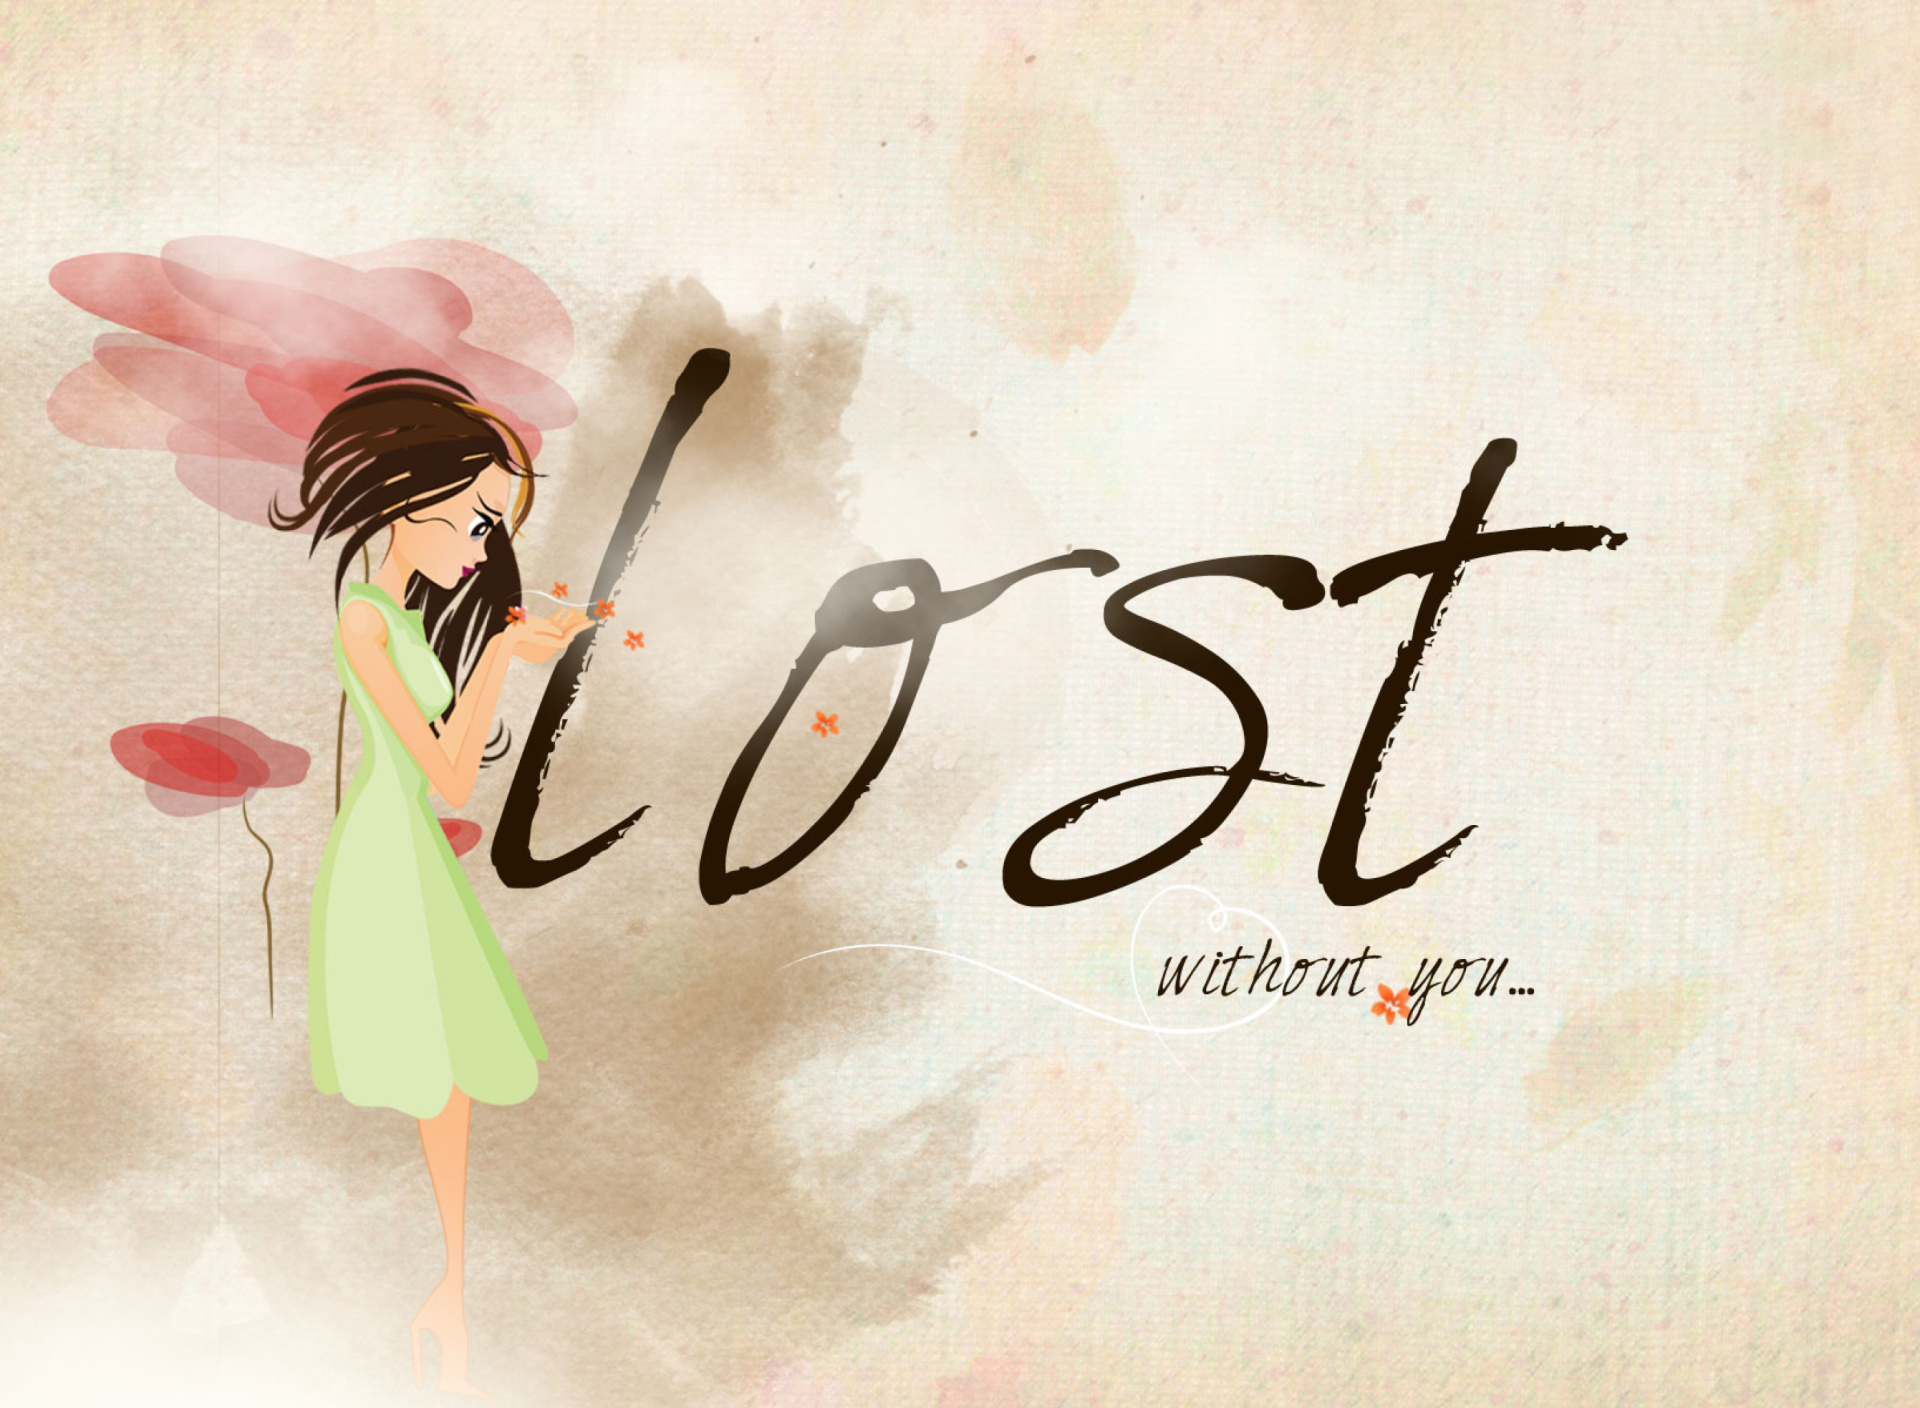 Lost Without You wallpaper 1920x1408